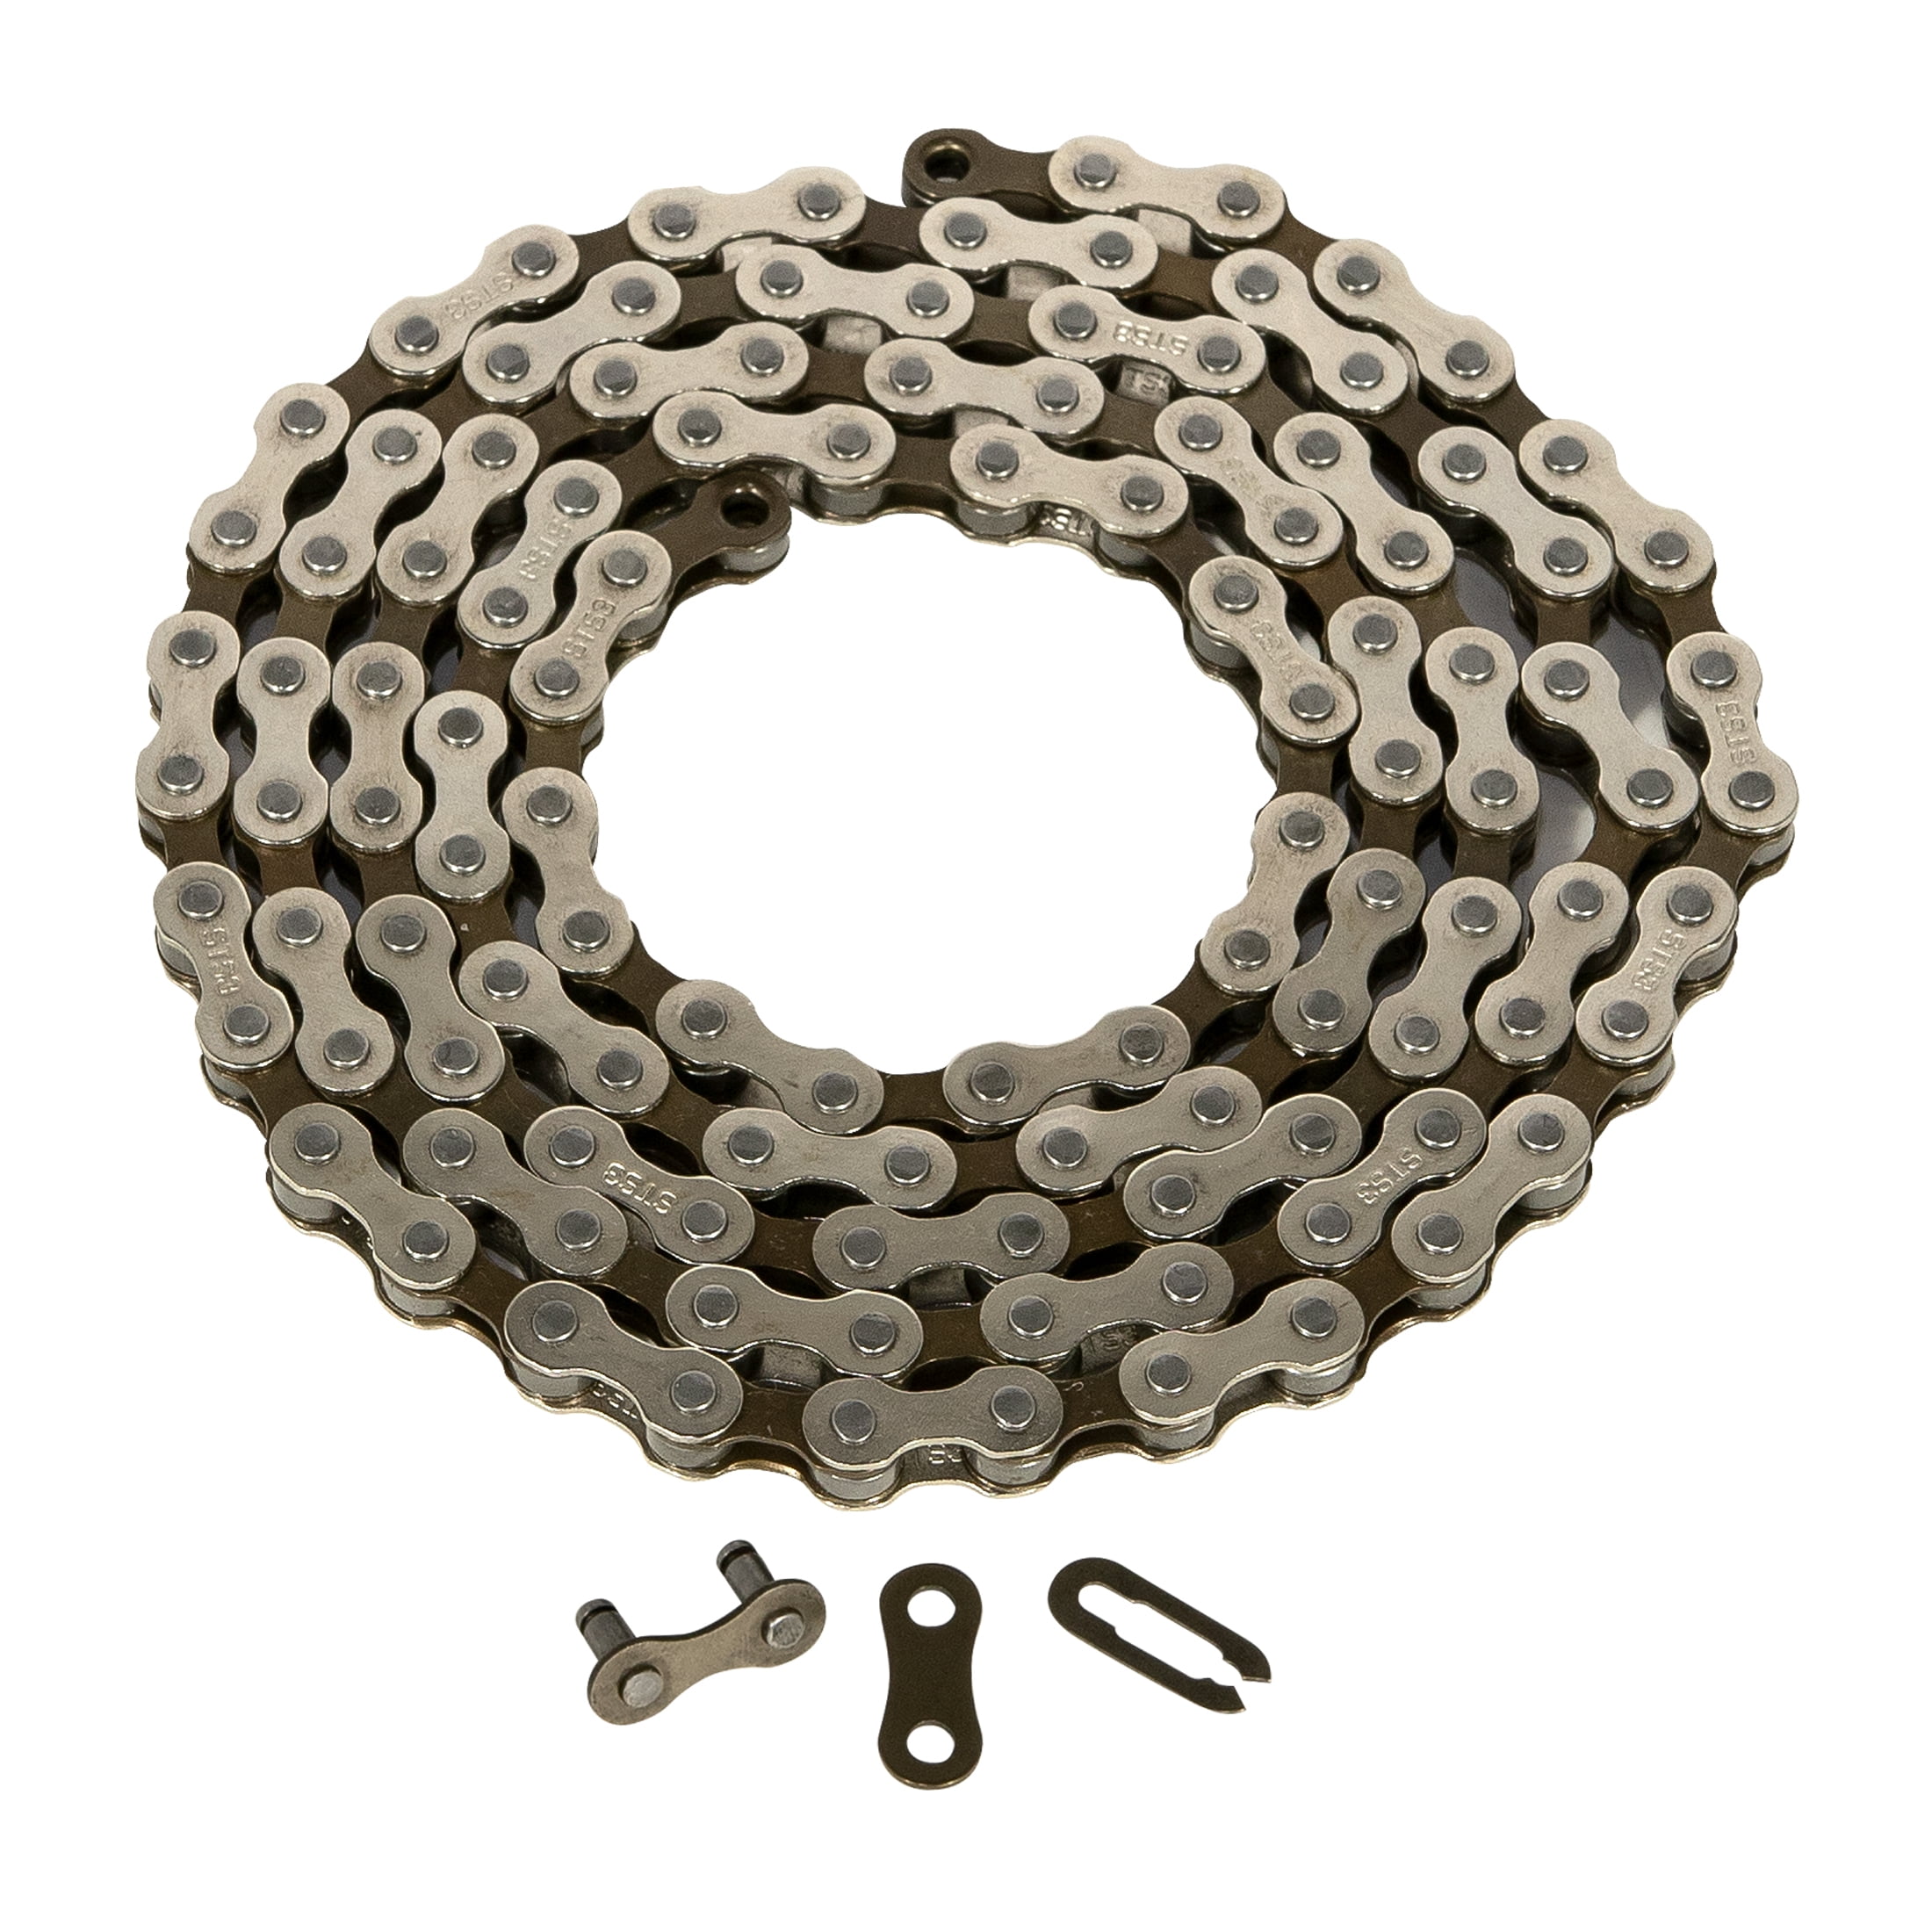 Recycled bicycle all chain bowl with edge 